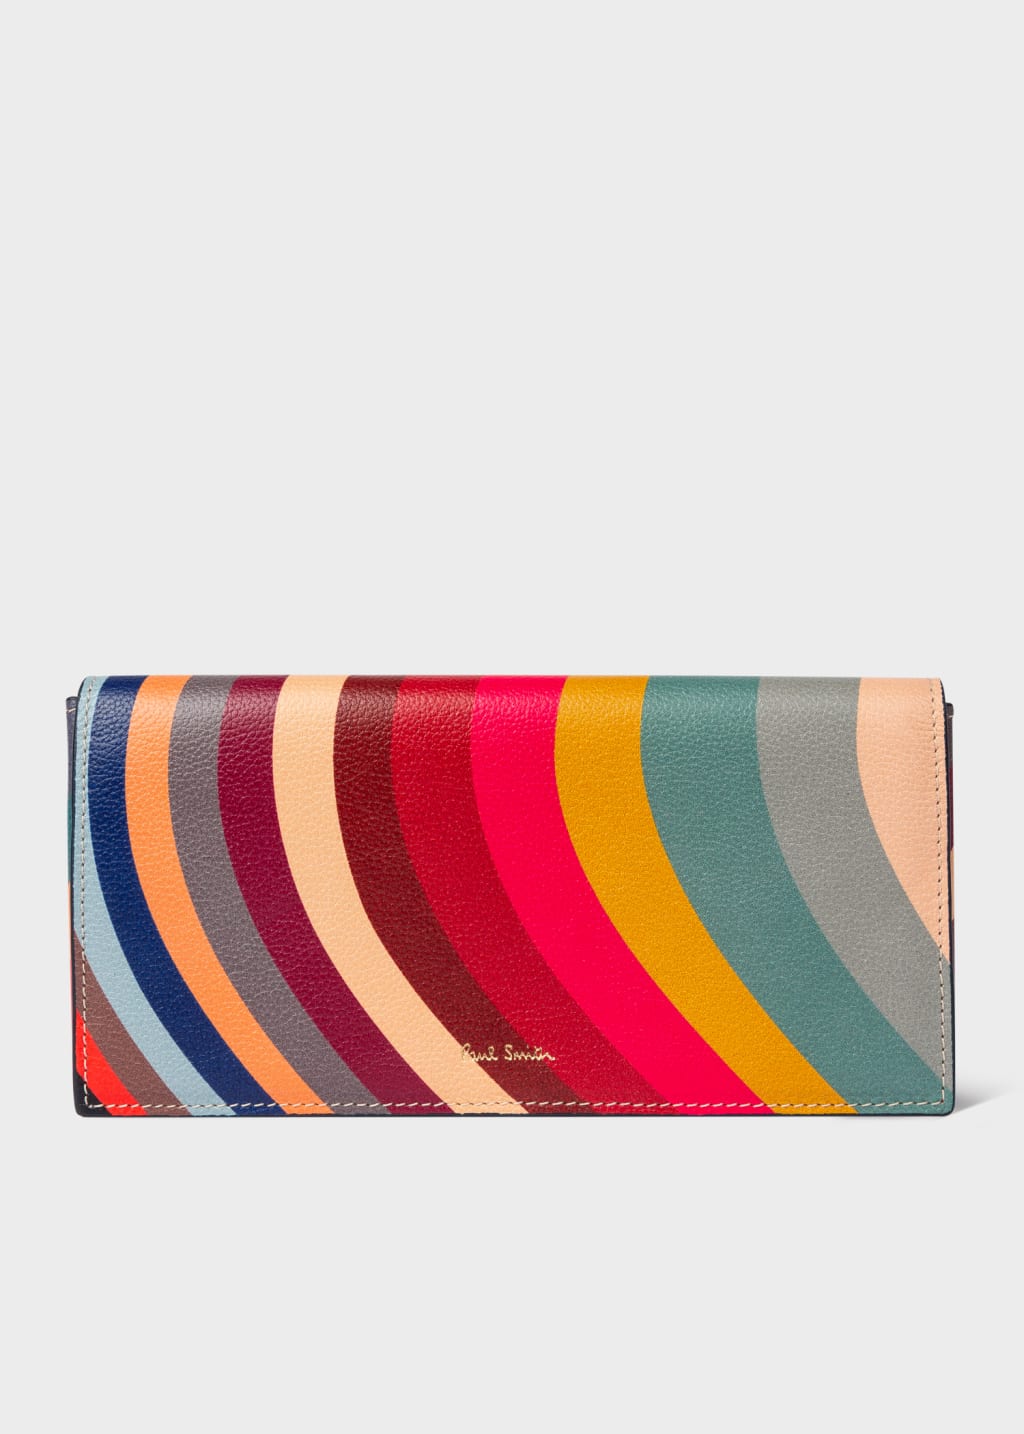 Product View - 'Swirl' Leather Tri-Fold Purse by Paul Smith